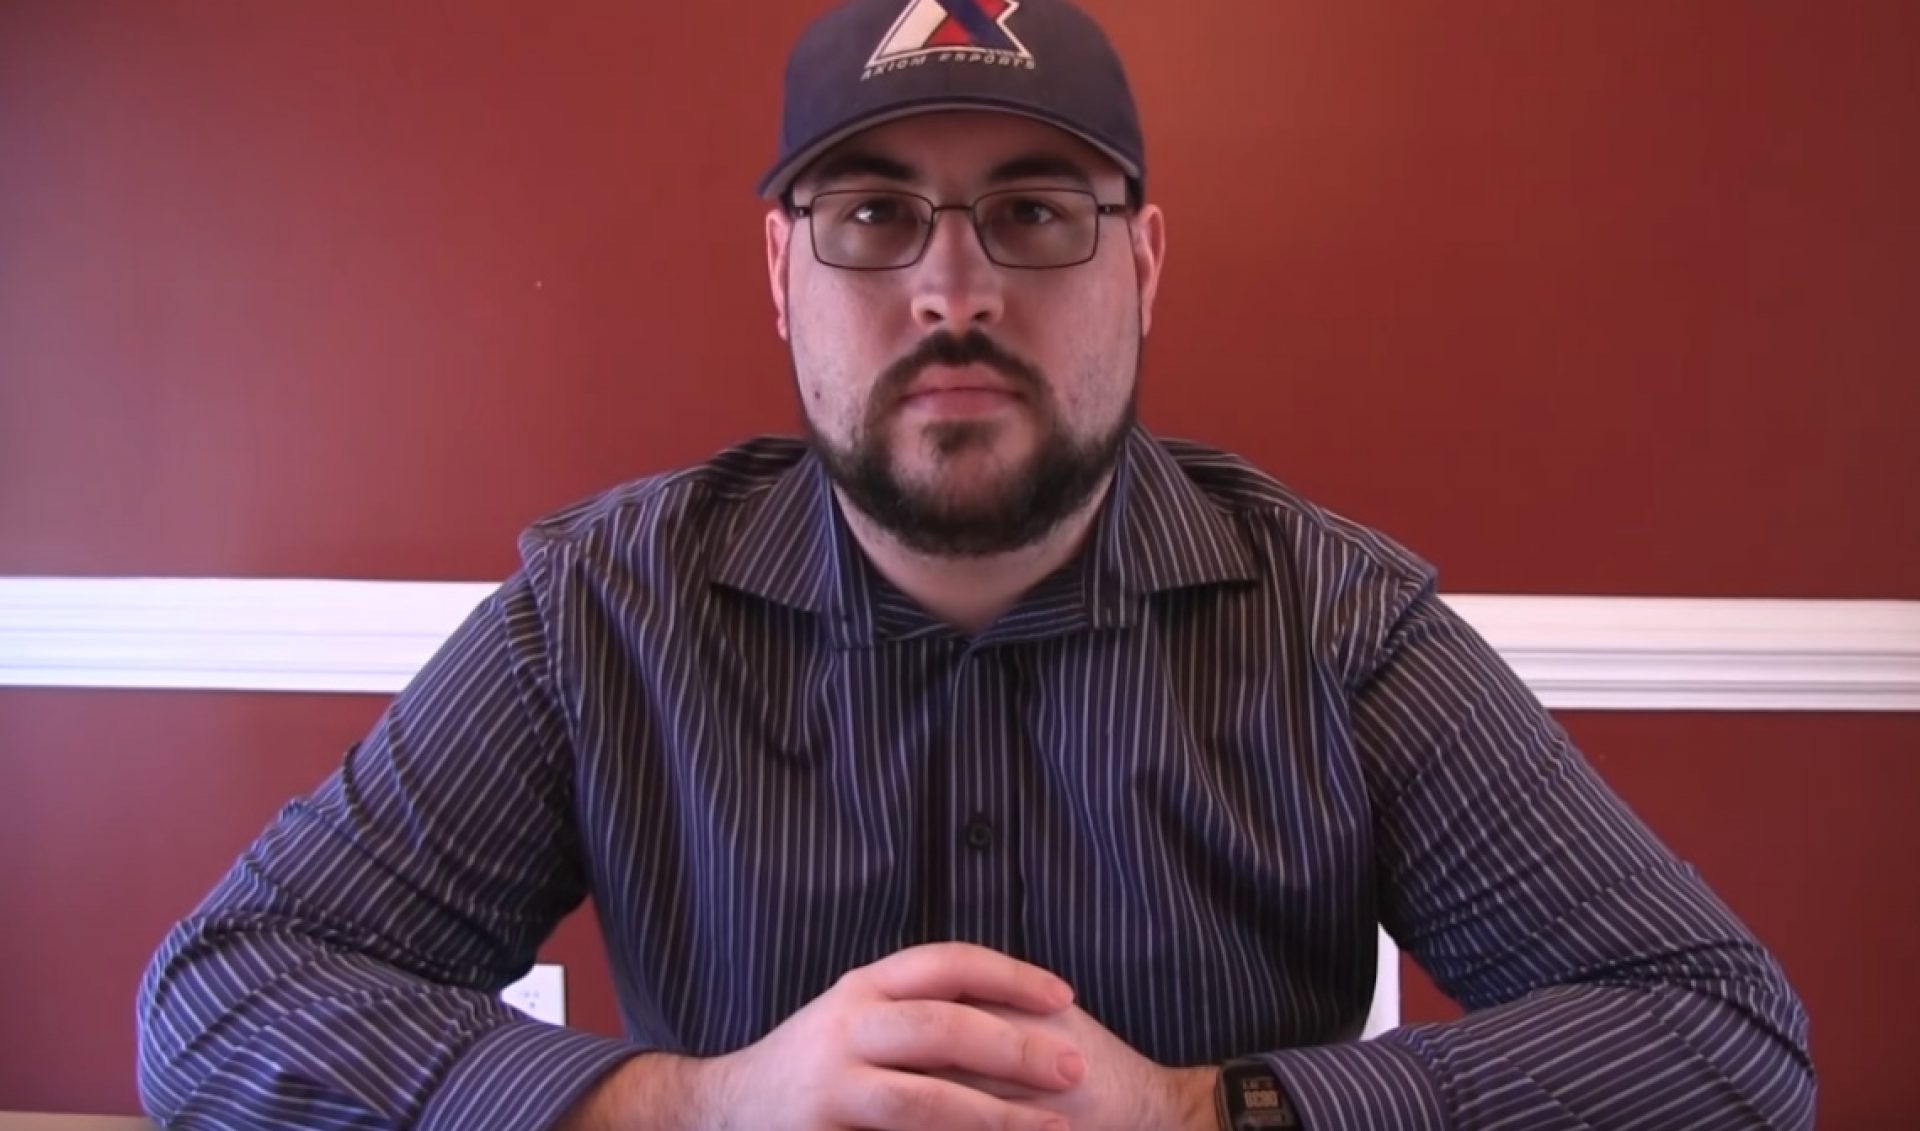 Gamer, YouTuber, And E-Sports Commentator John “TotalBiscuit” Bain Dies At 33